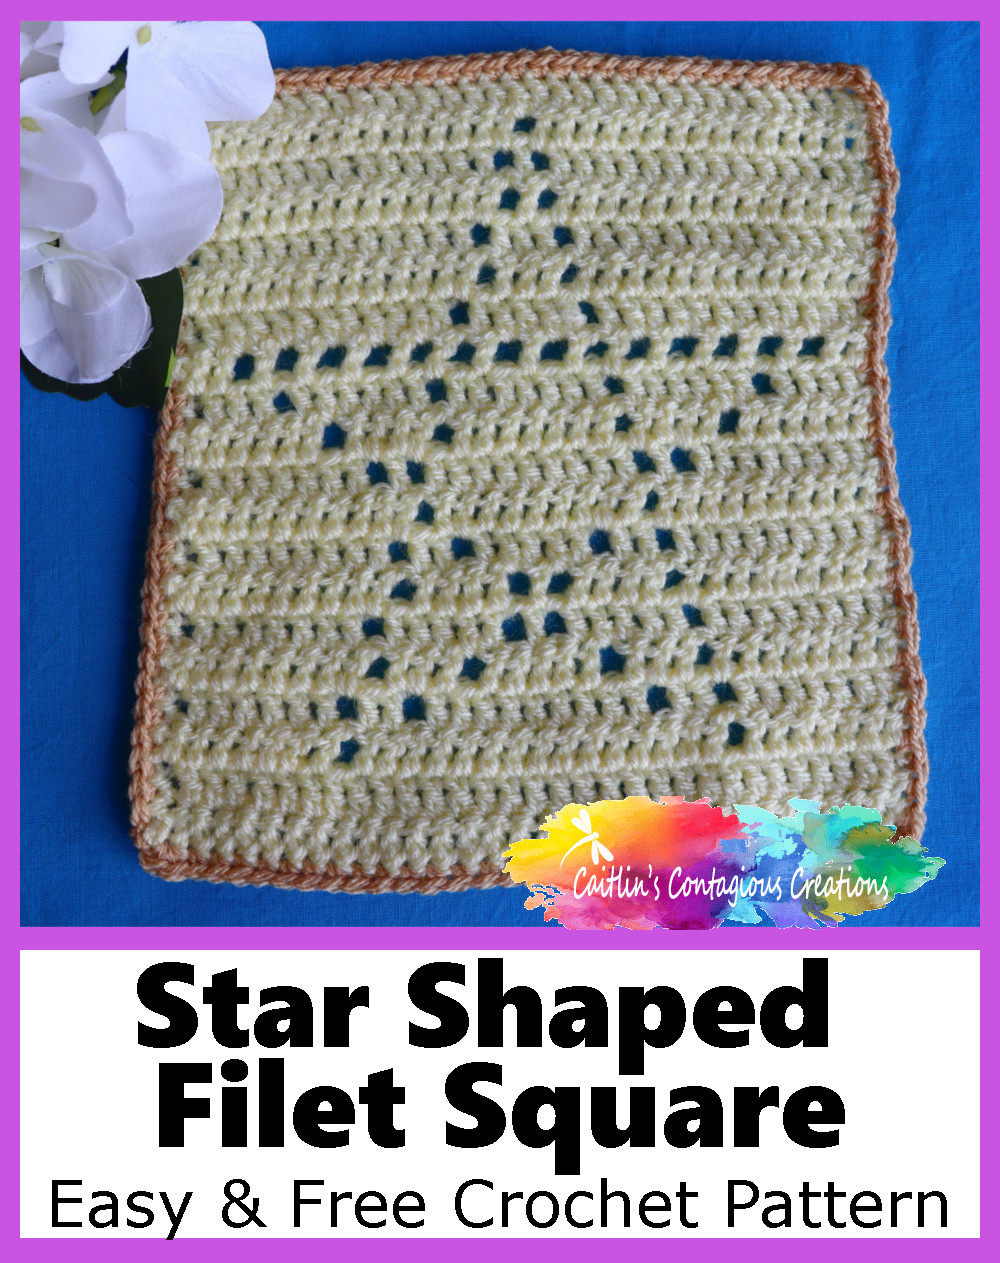 Free Star Shape Filet Square Crochet Pattern with written directions, photos, and a stitch diagram is fun for beginners and easy crochet skill levels.